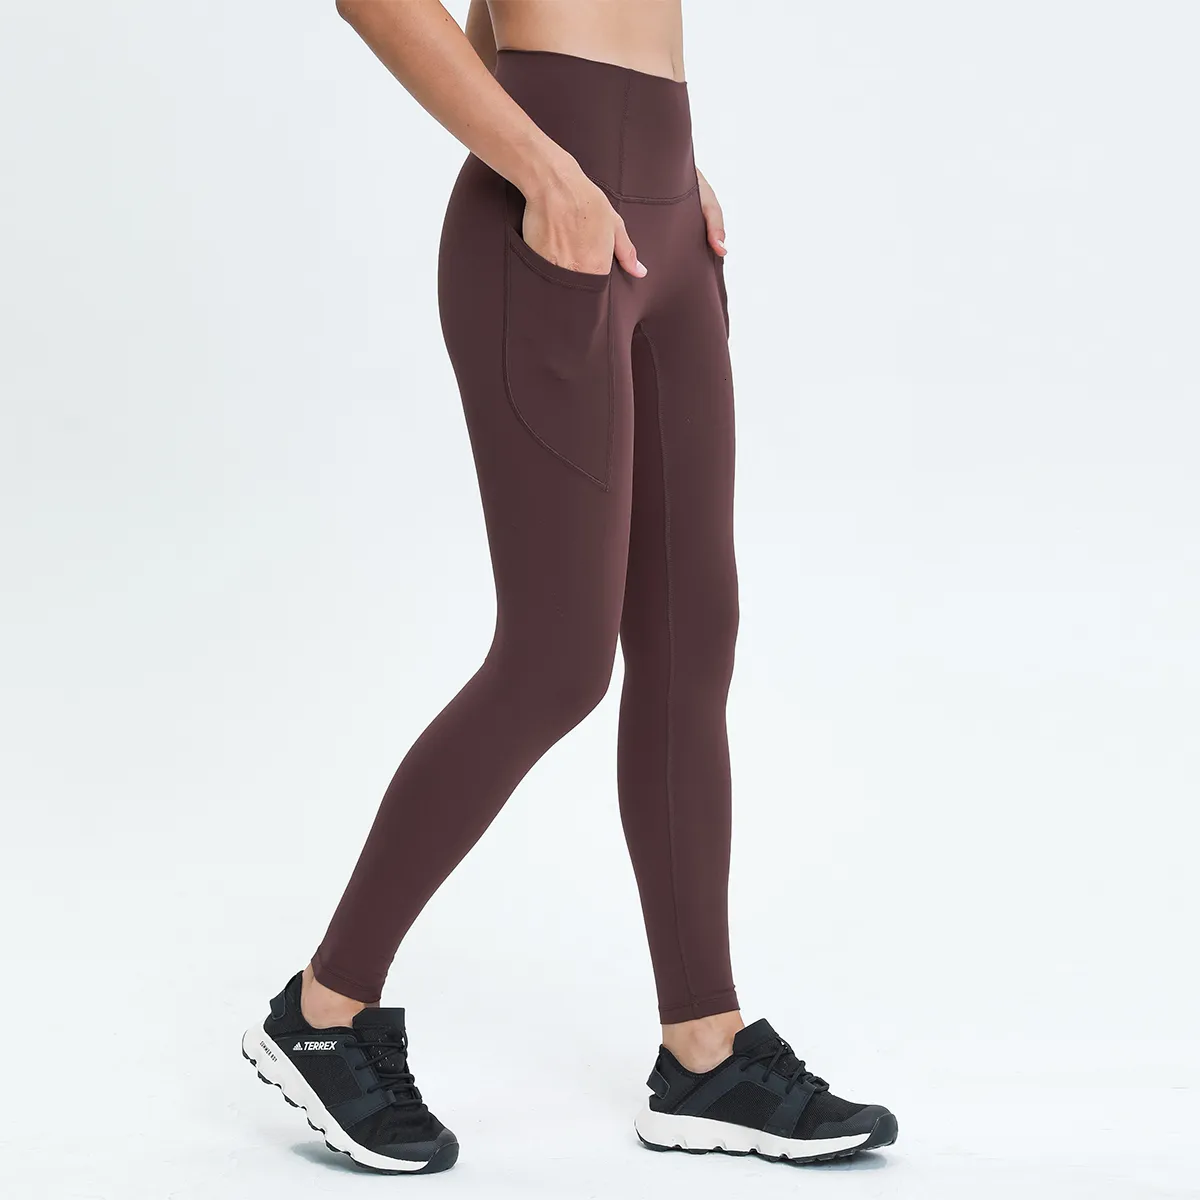 LOVELIFE Womens Yoga Oner Active Leggings Full Length With Side Pockets,  High Waisted Buttery Soft Yoga Pant 28 Inch Inseam From Kong003, $19.57